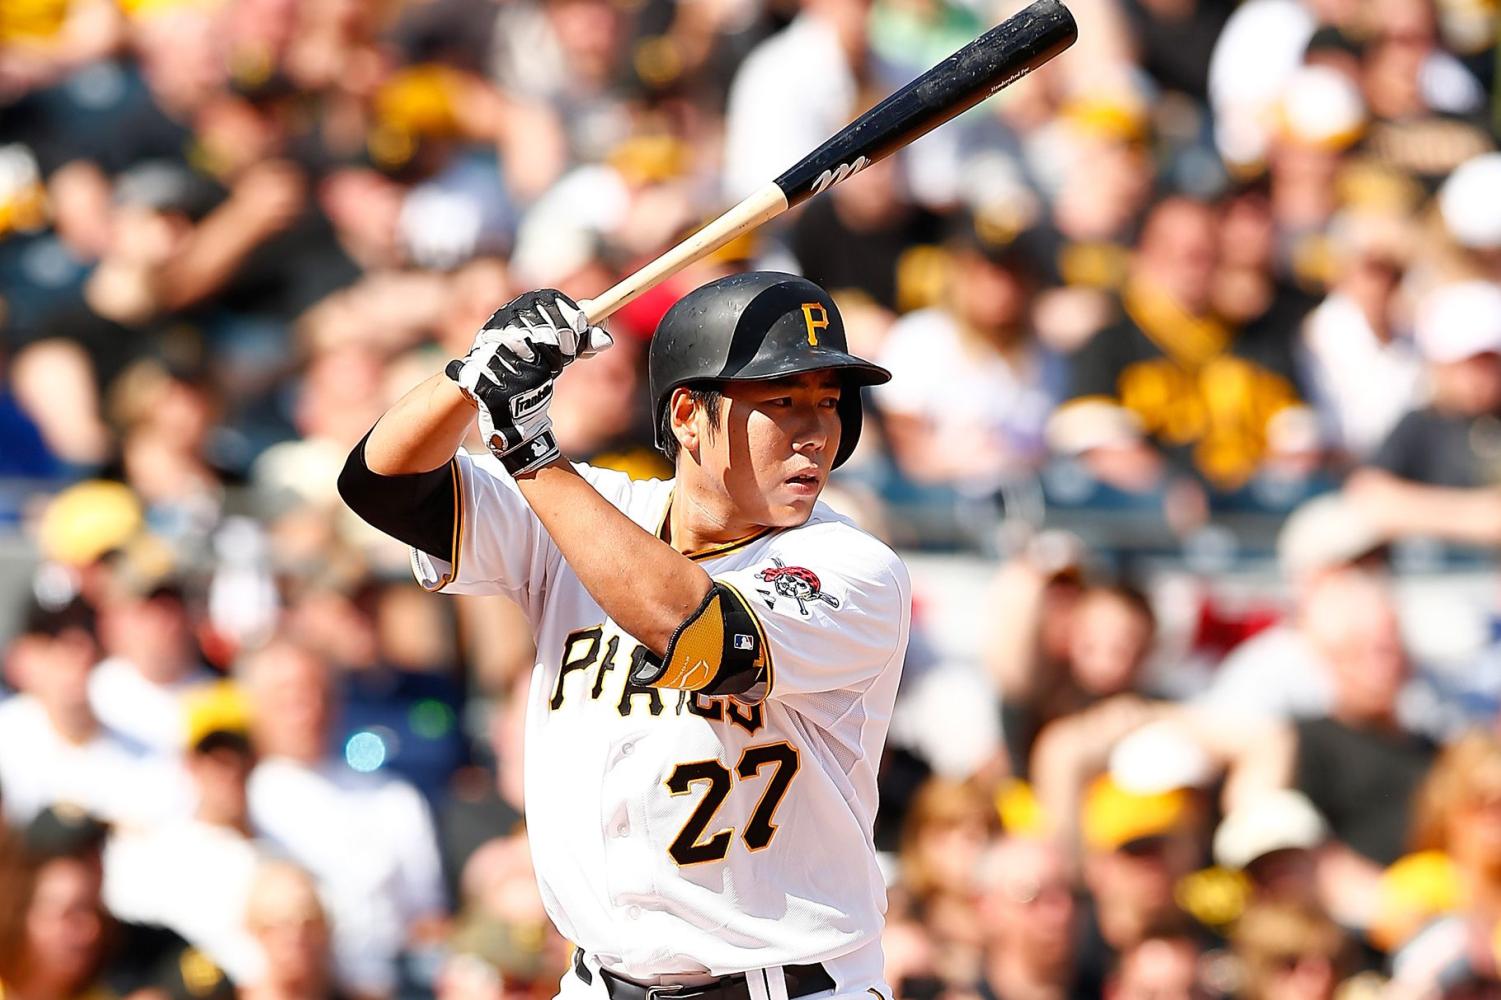 The Mysterious Disappearance Of Jung Ho Kang – The Foreword